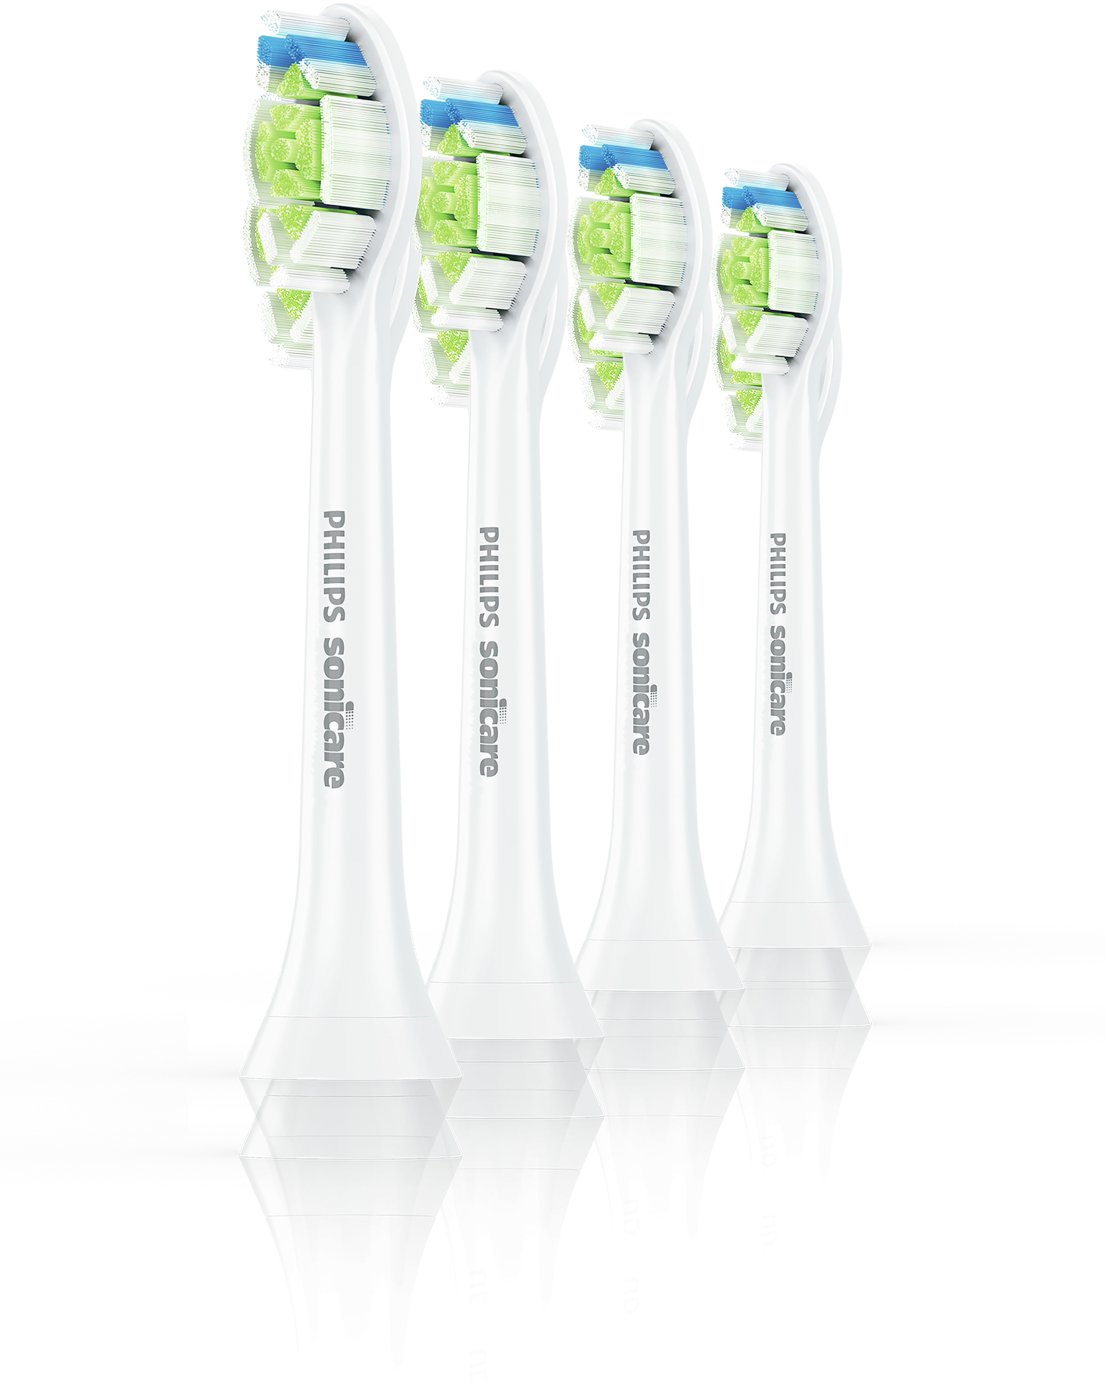 Philips Sonicare DiamondClean Electric Toothbrush Heads -4Pk